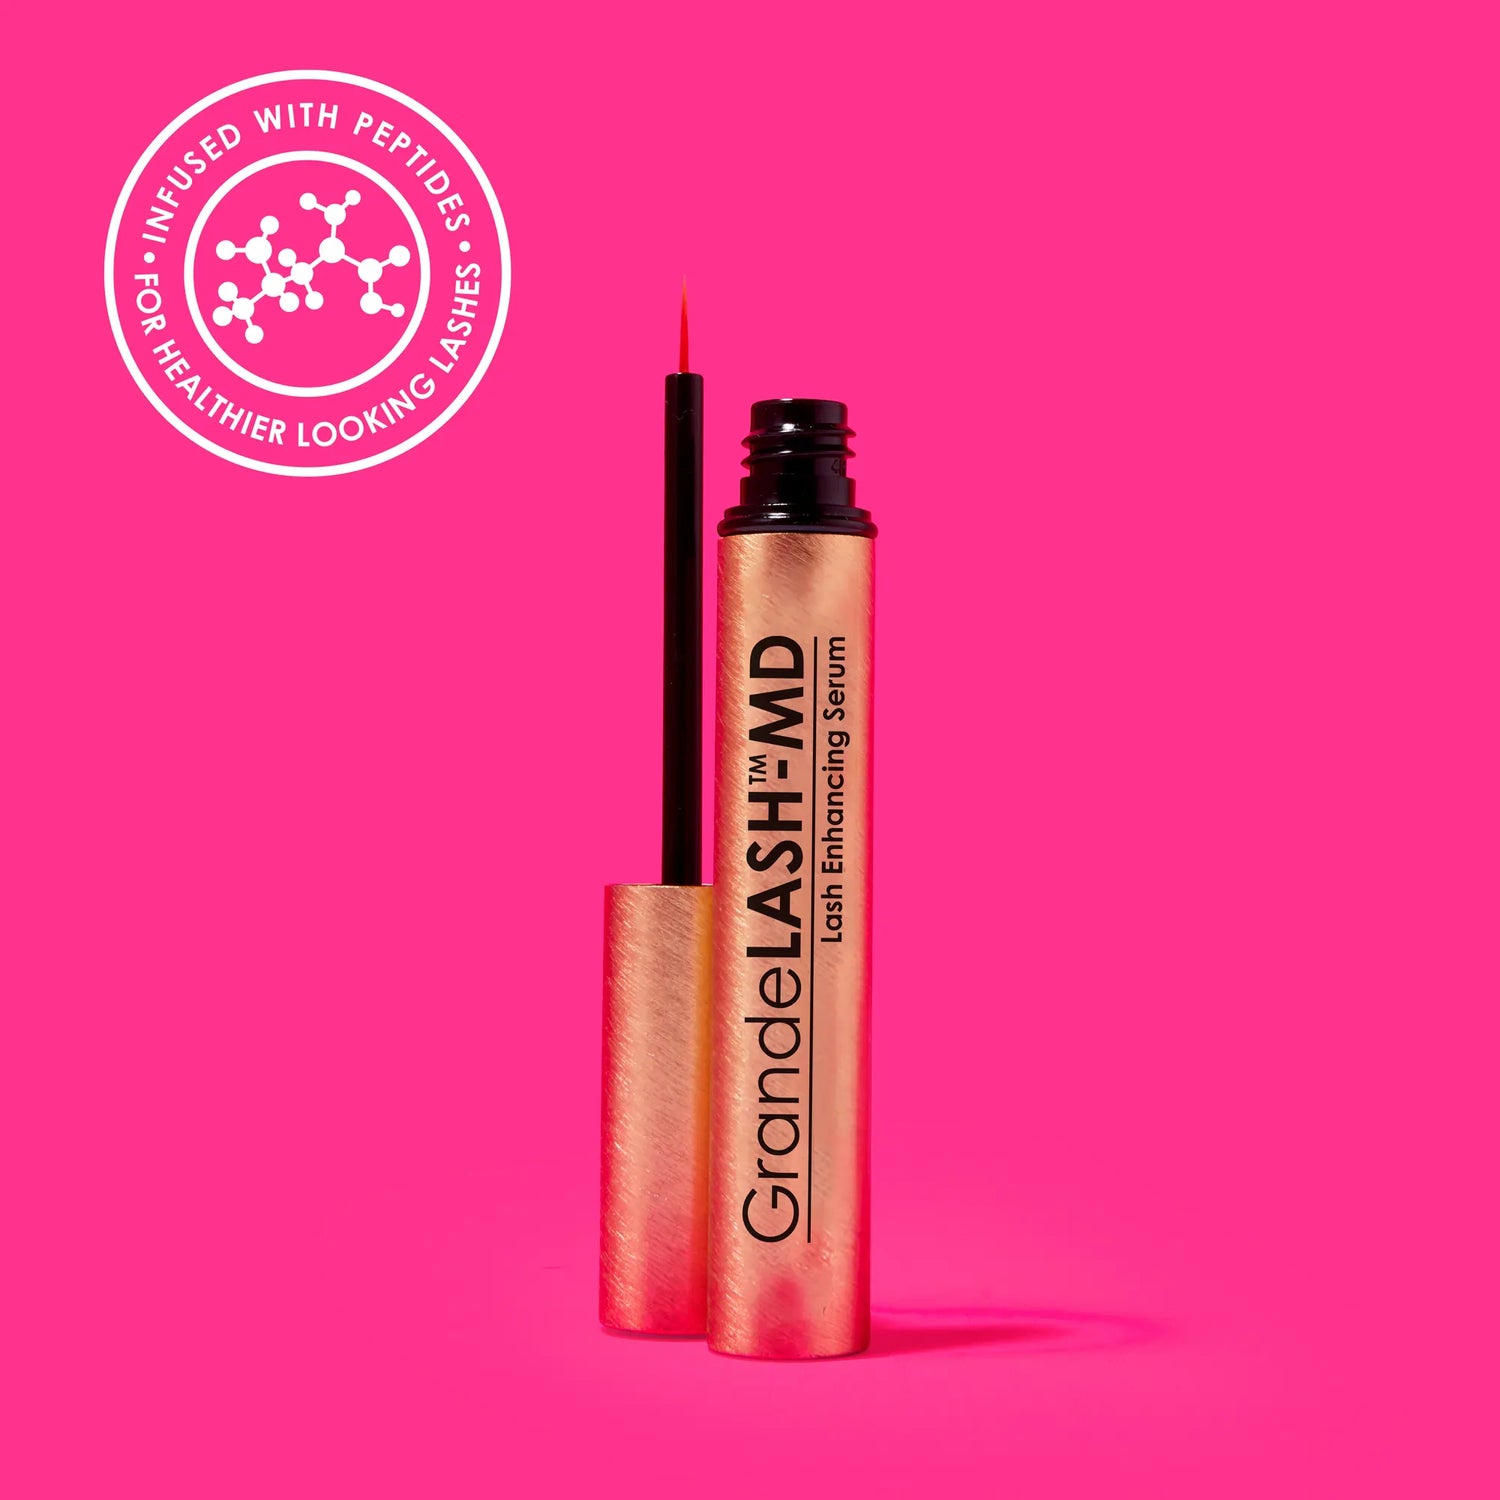 for the lashes of your dreams, use grandeLASH md lash growth serum for long luscious lashes at heaven on earth 